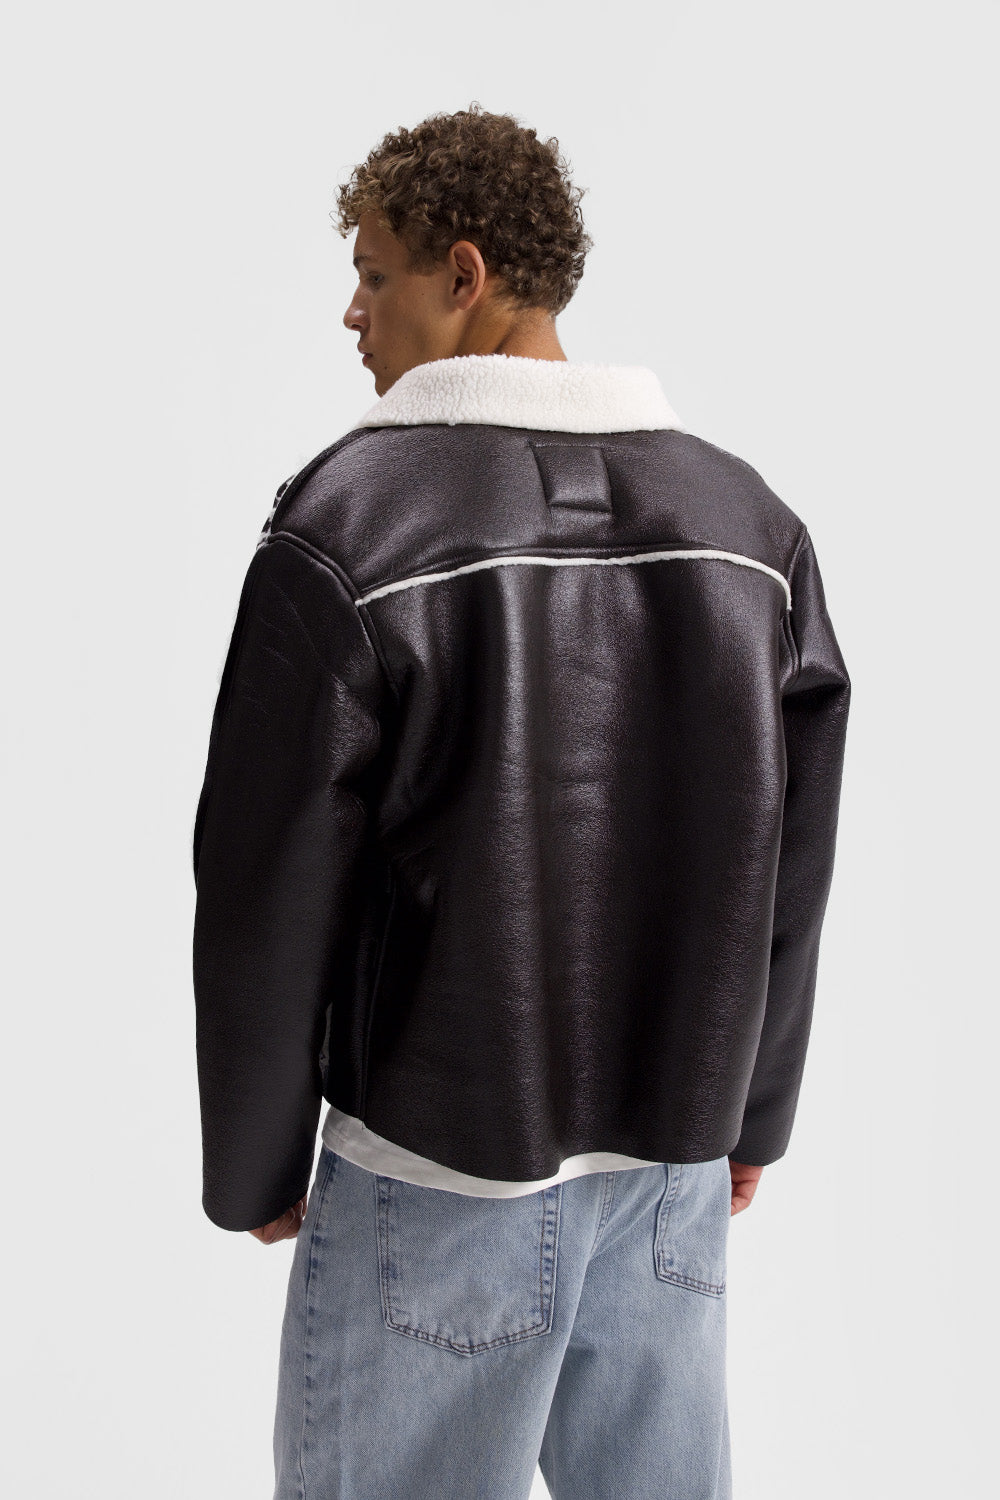 LEATHER JACKET WITH LINING DETAIL